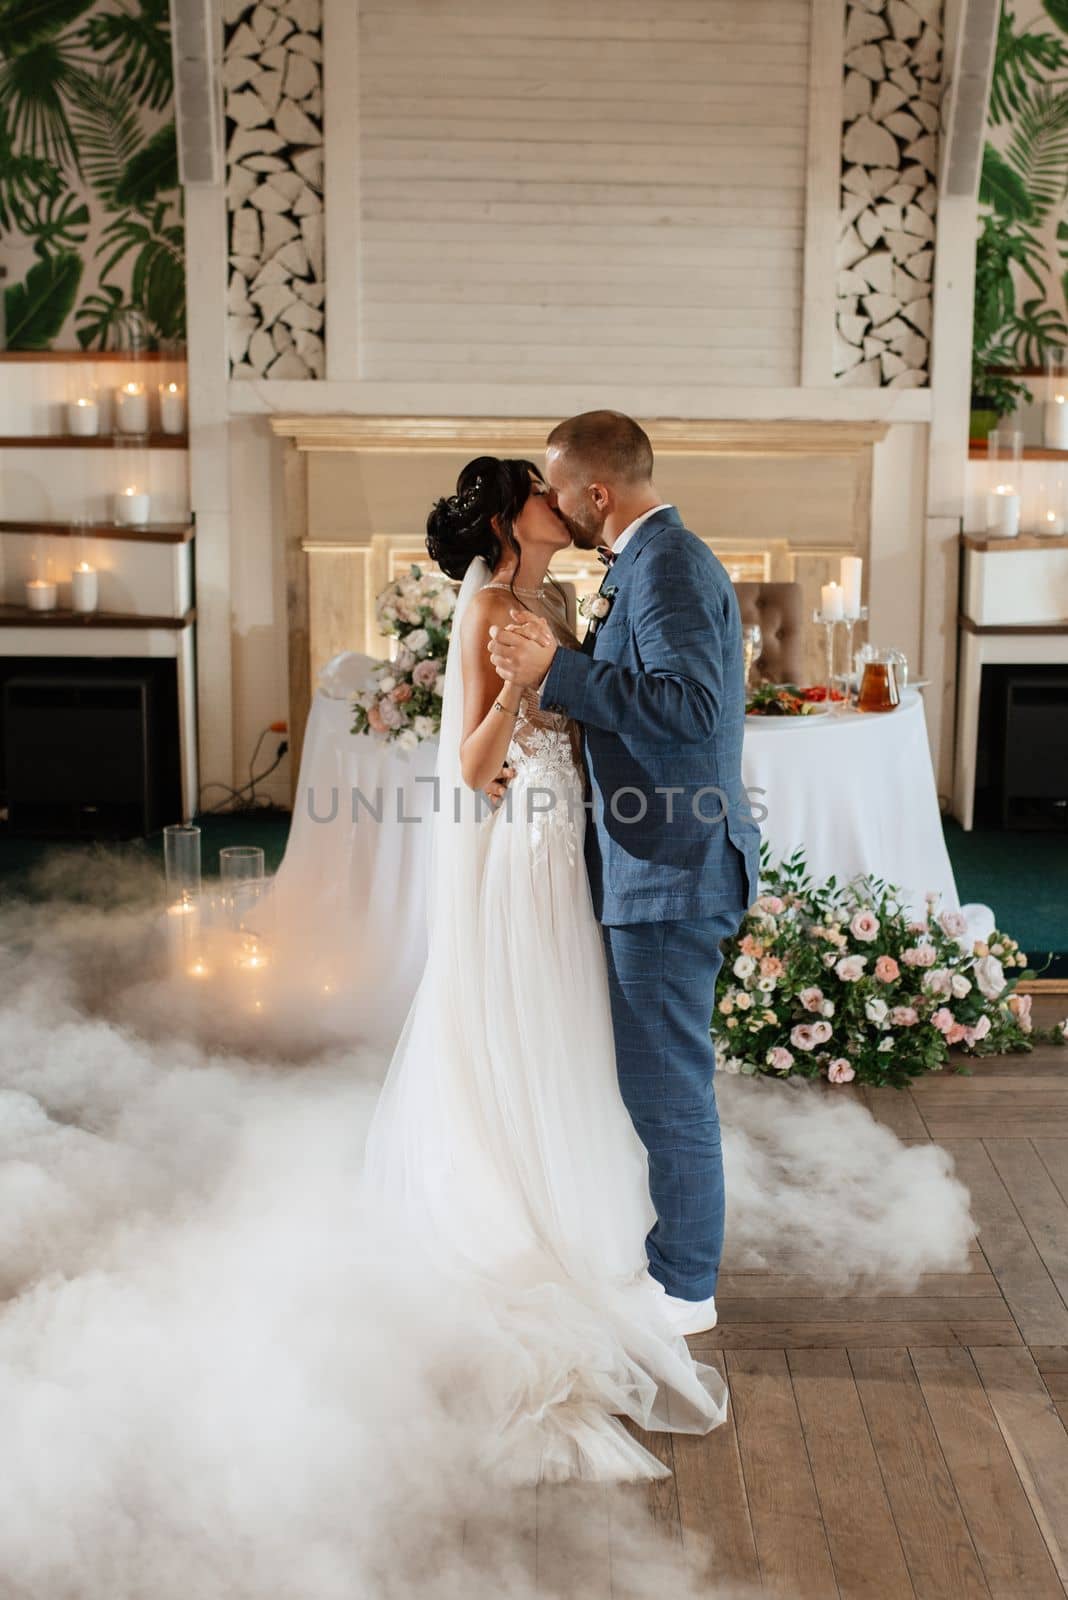 the first dance of the bride and groom inside a restaurant with heavy smoke